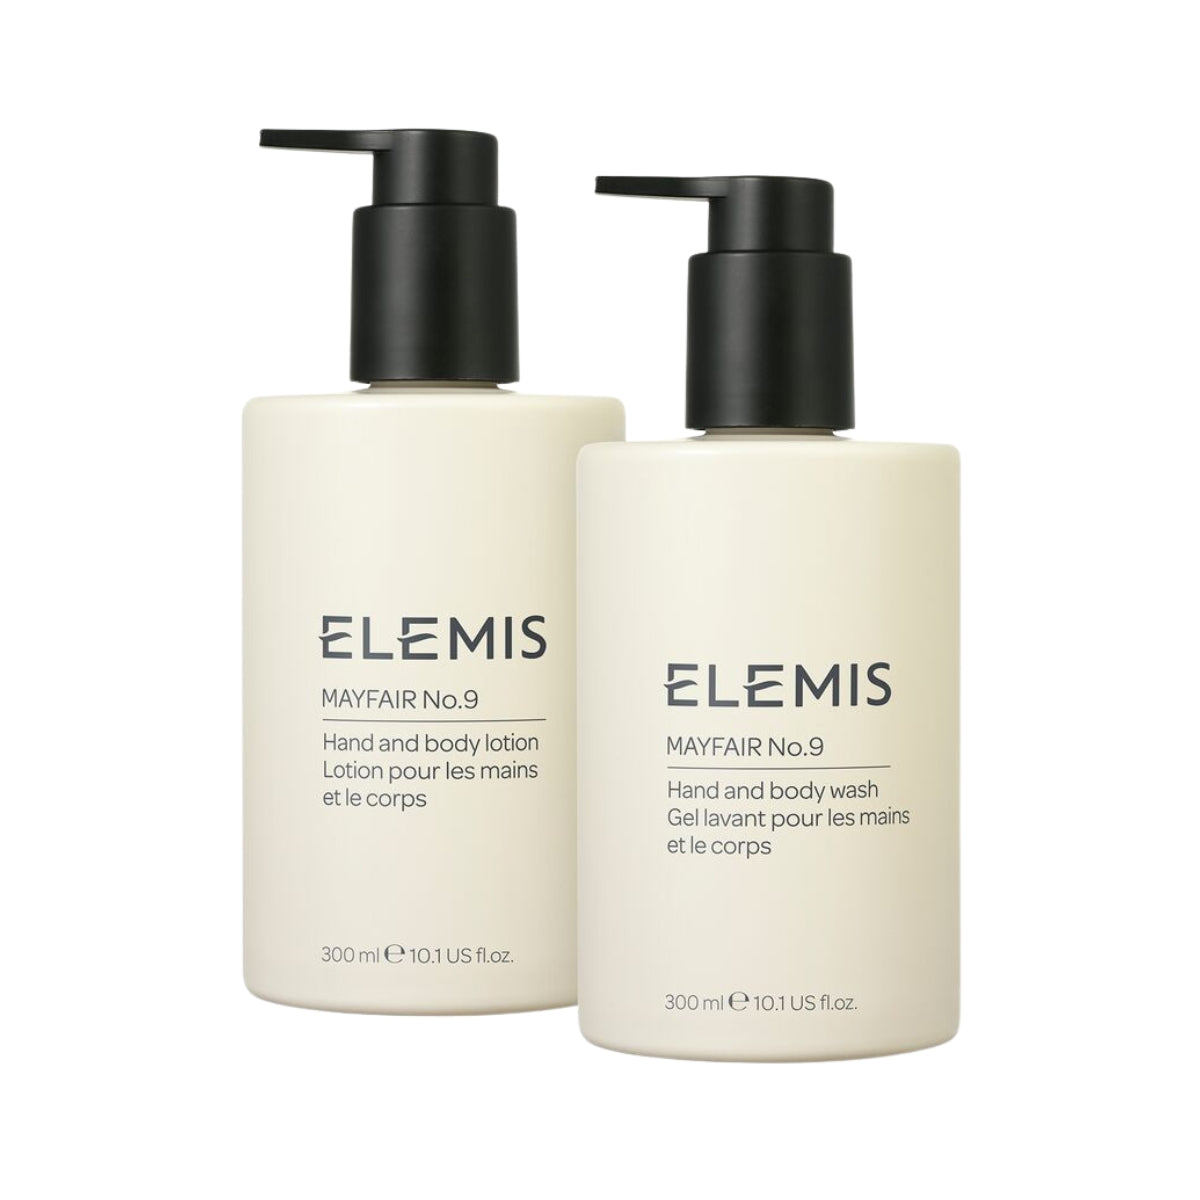 Elemis Mayfair No.9 Hand and Body Duo Gift Set